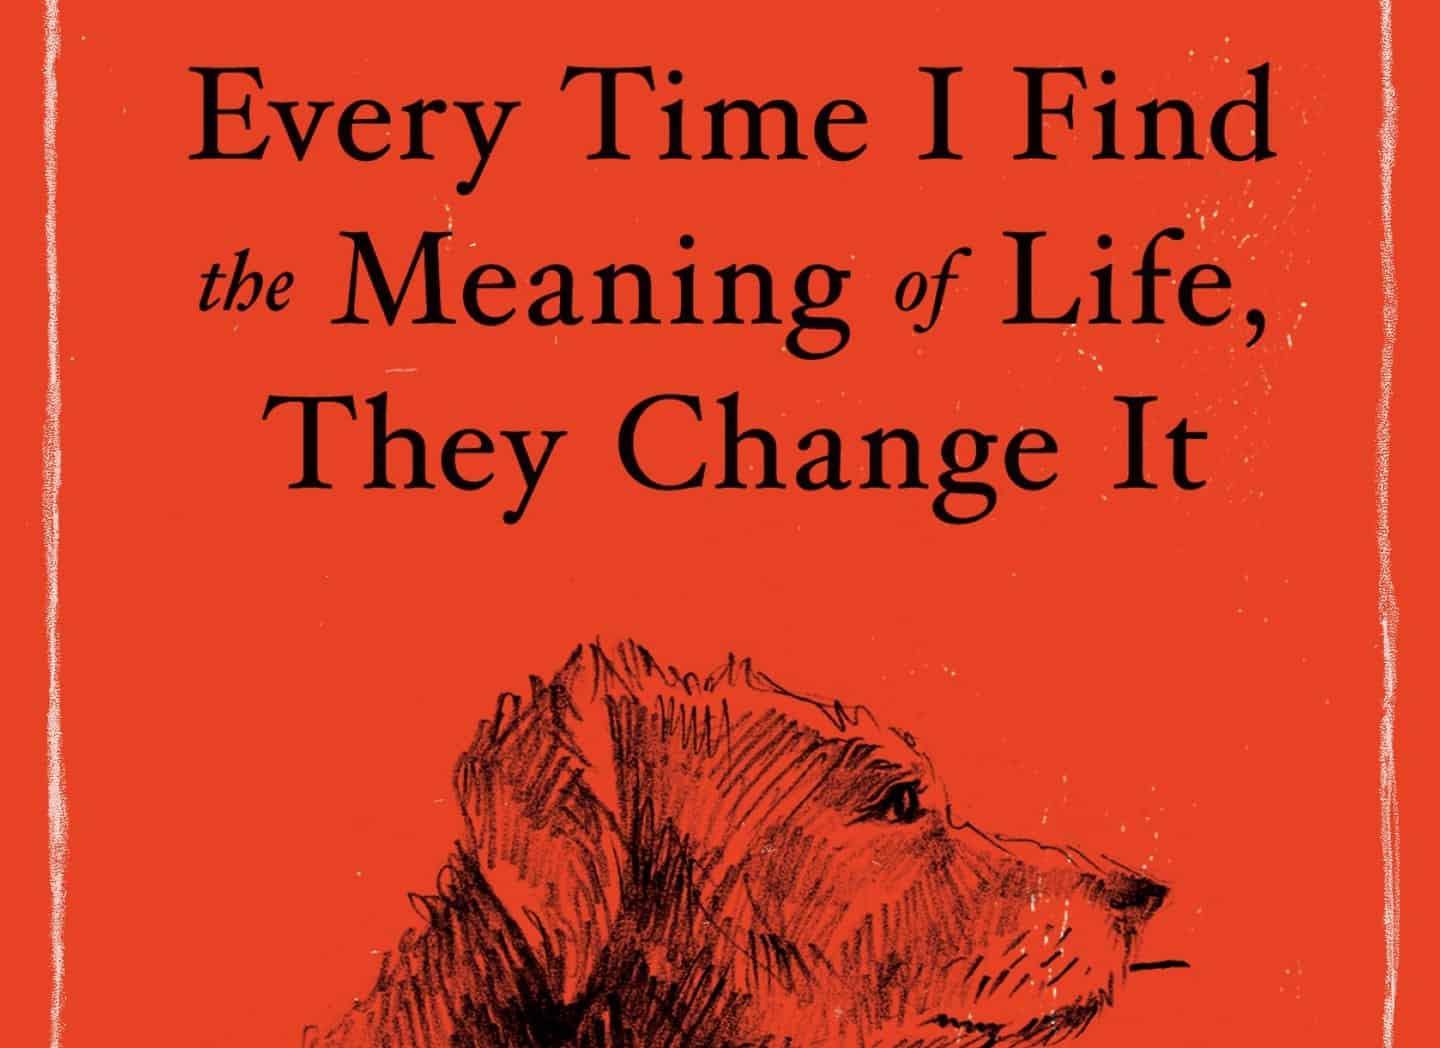 Every Time I Find the Meaning of Life, They Change It: Wisdom of the Great Philosophers on How to Live - funny book